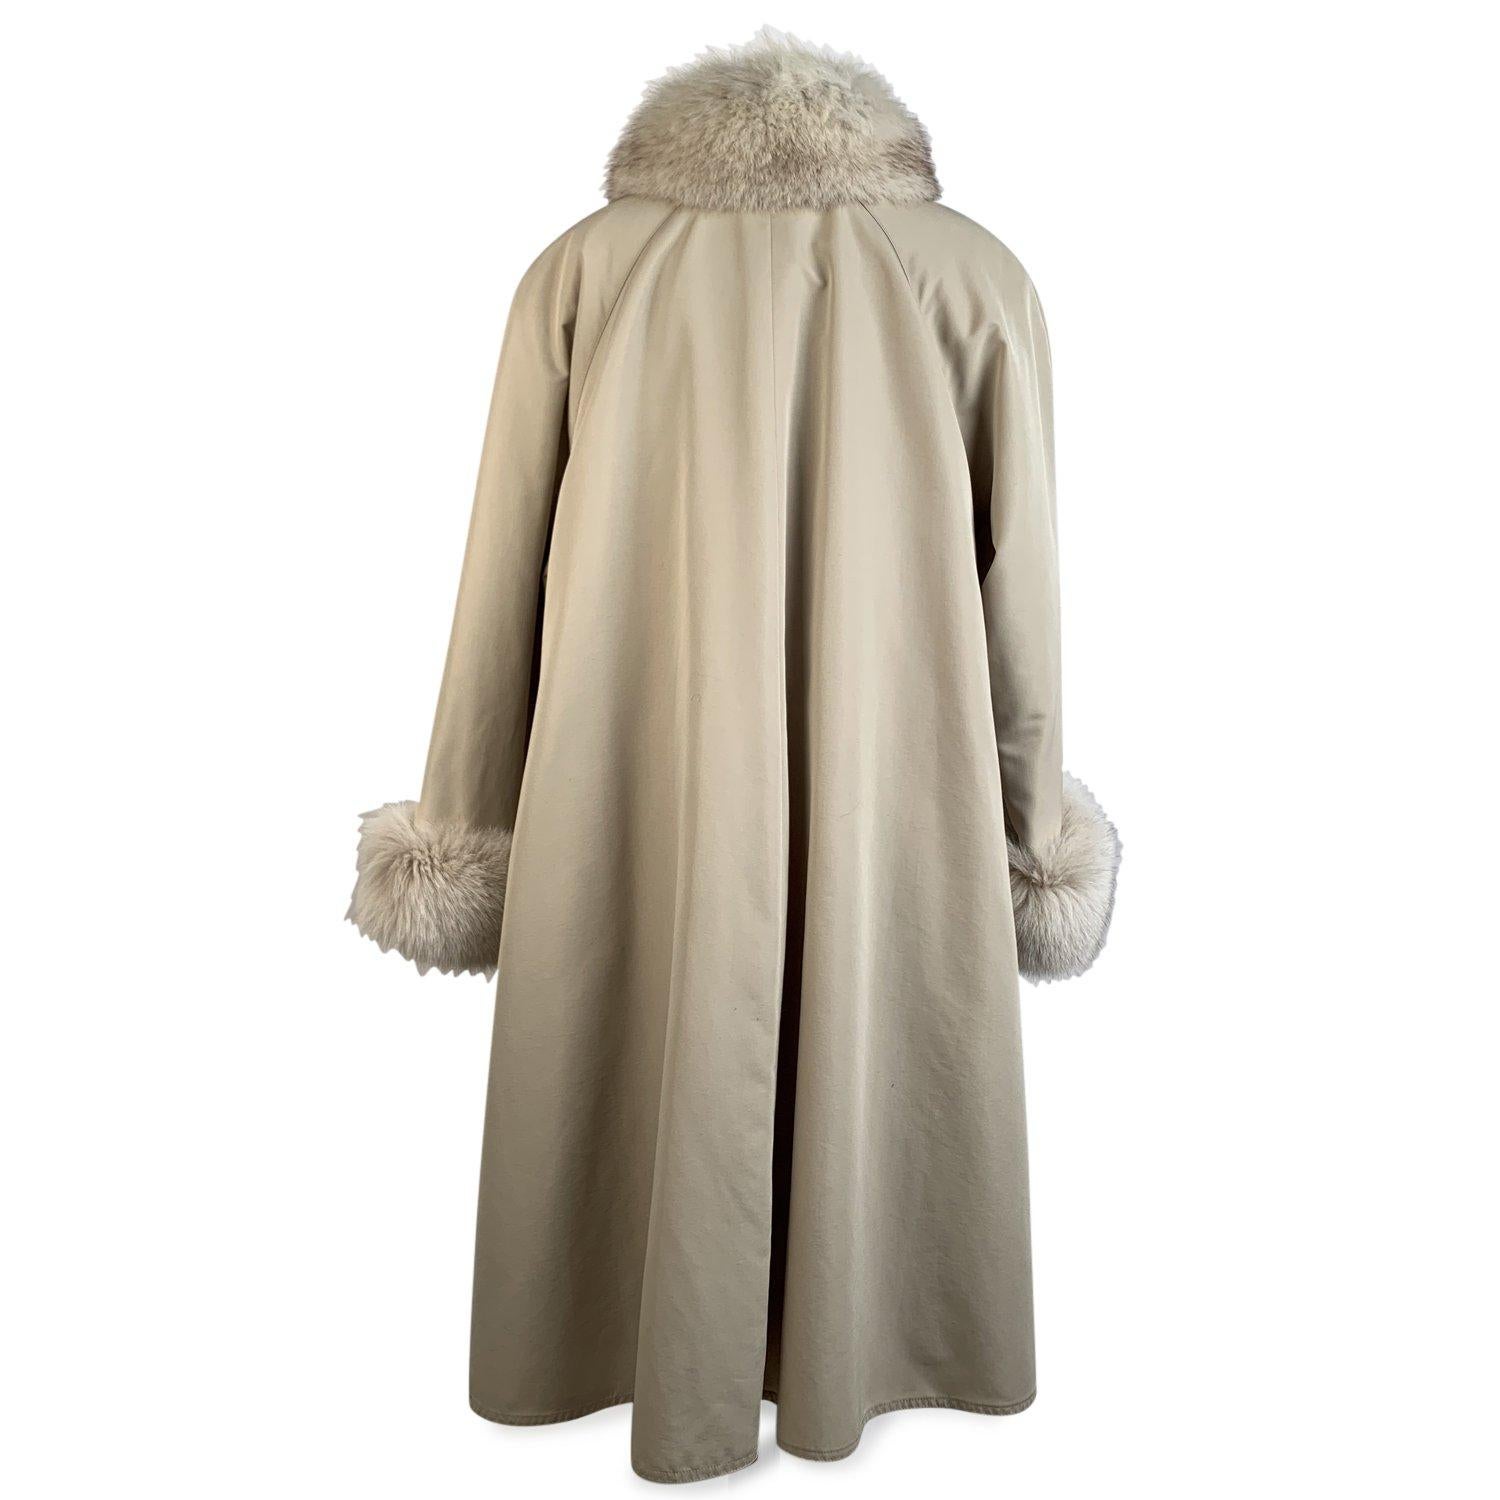 Vintage beige single breated Coat with Fox Fur Trim. Front button closure Fox fur trim on collar and on the cuffs in beige color. Removable sleeveless lining. Side slits with buttons.Size is not indicated. Estimated size is a MEDIUM size Details